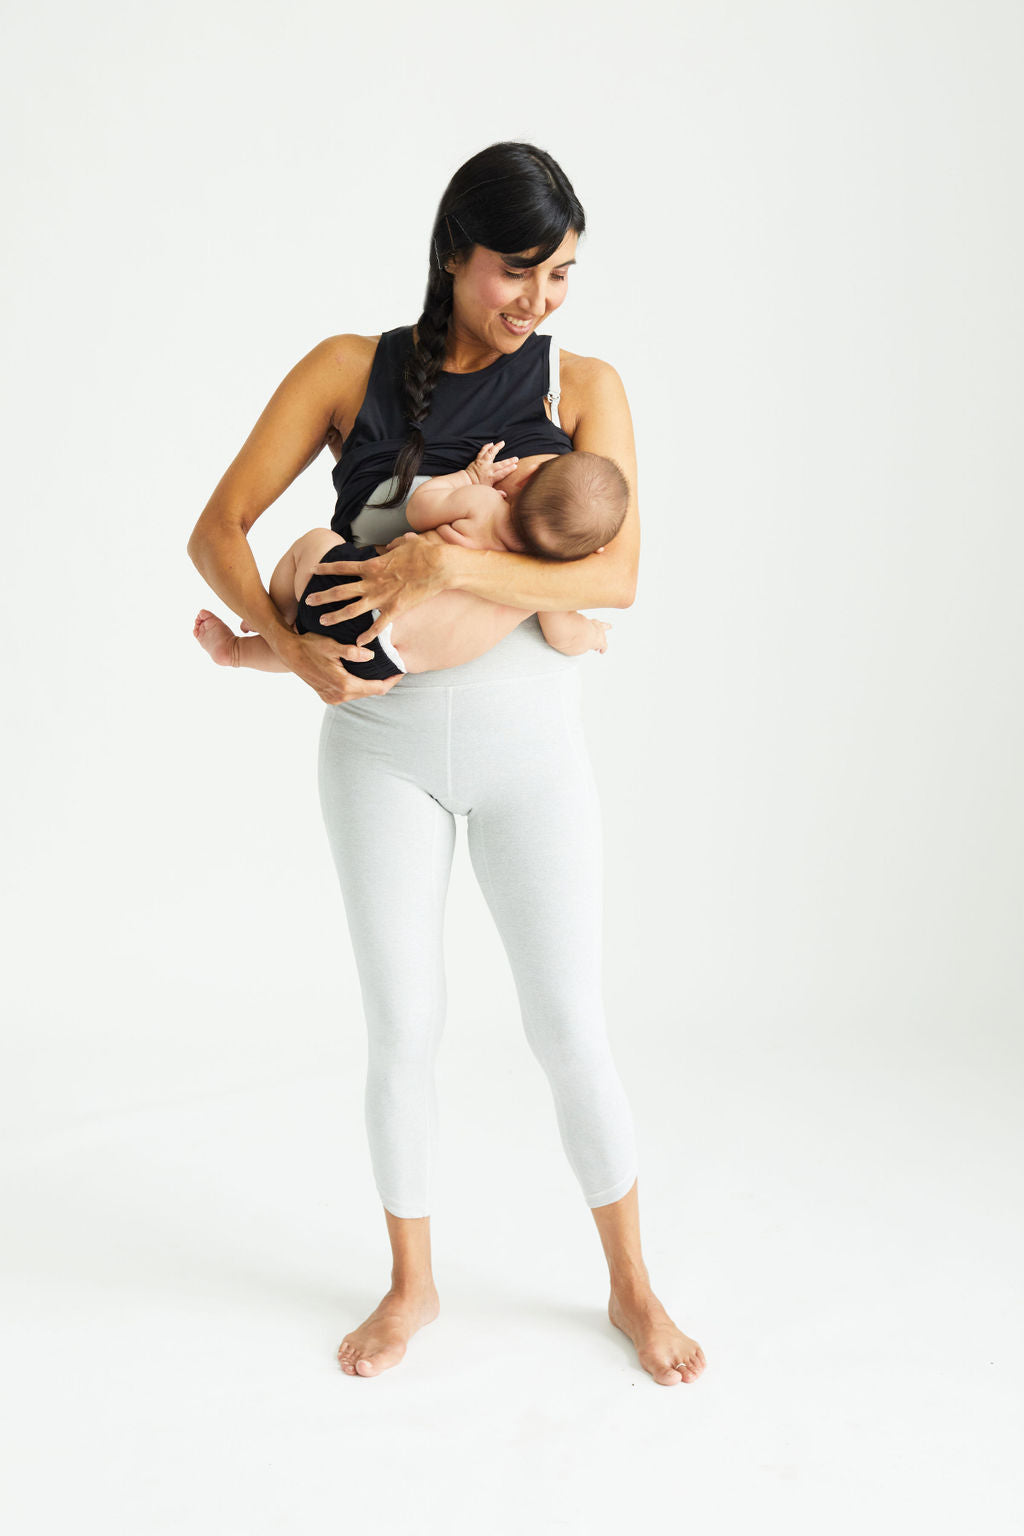 Nursing sports bra, yes please! Shop MOMents Clothing active wear,  maternity leggings, nursing camisoles and muscle tees at 15% off! Thi